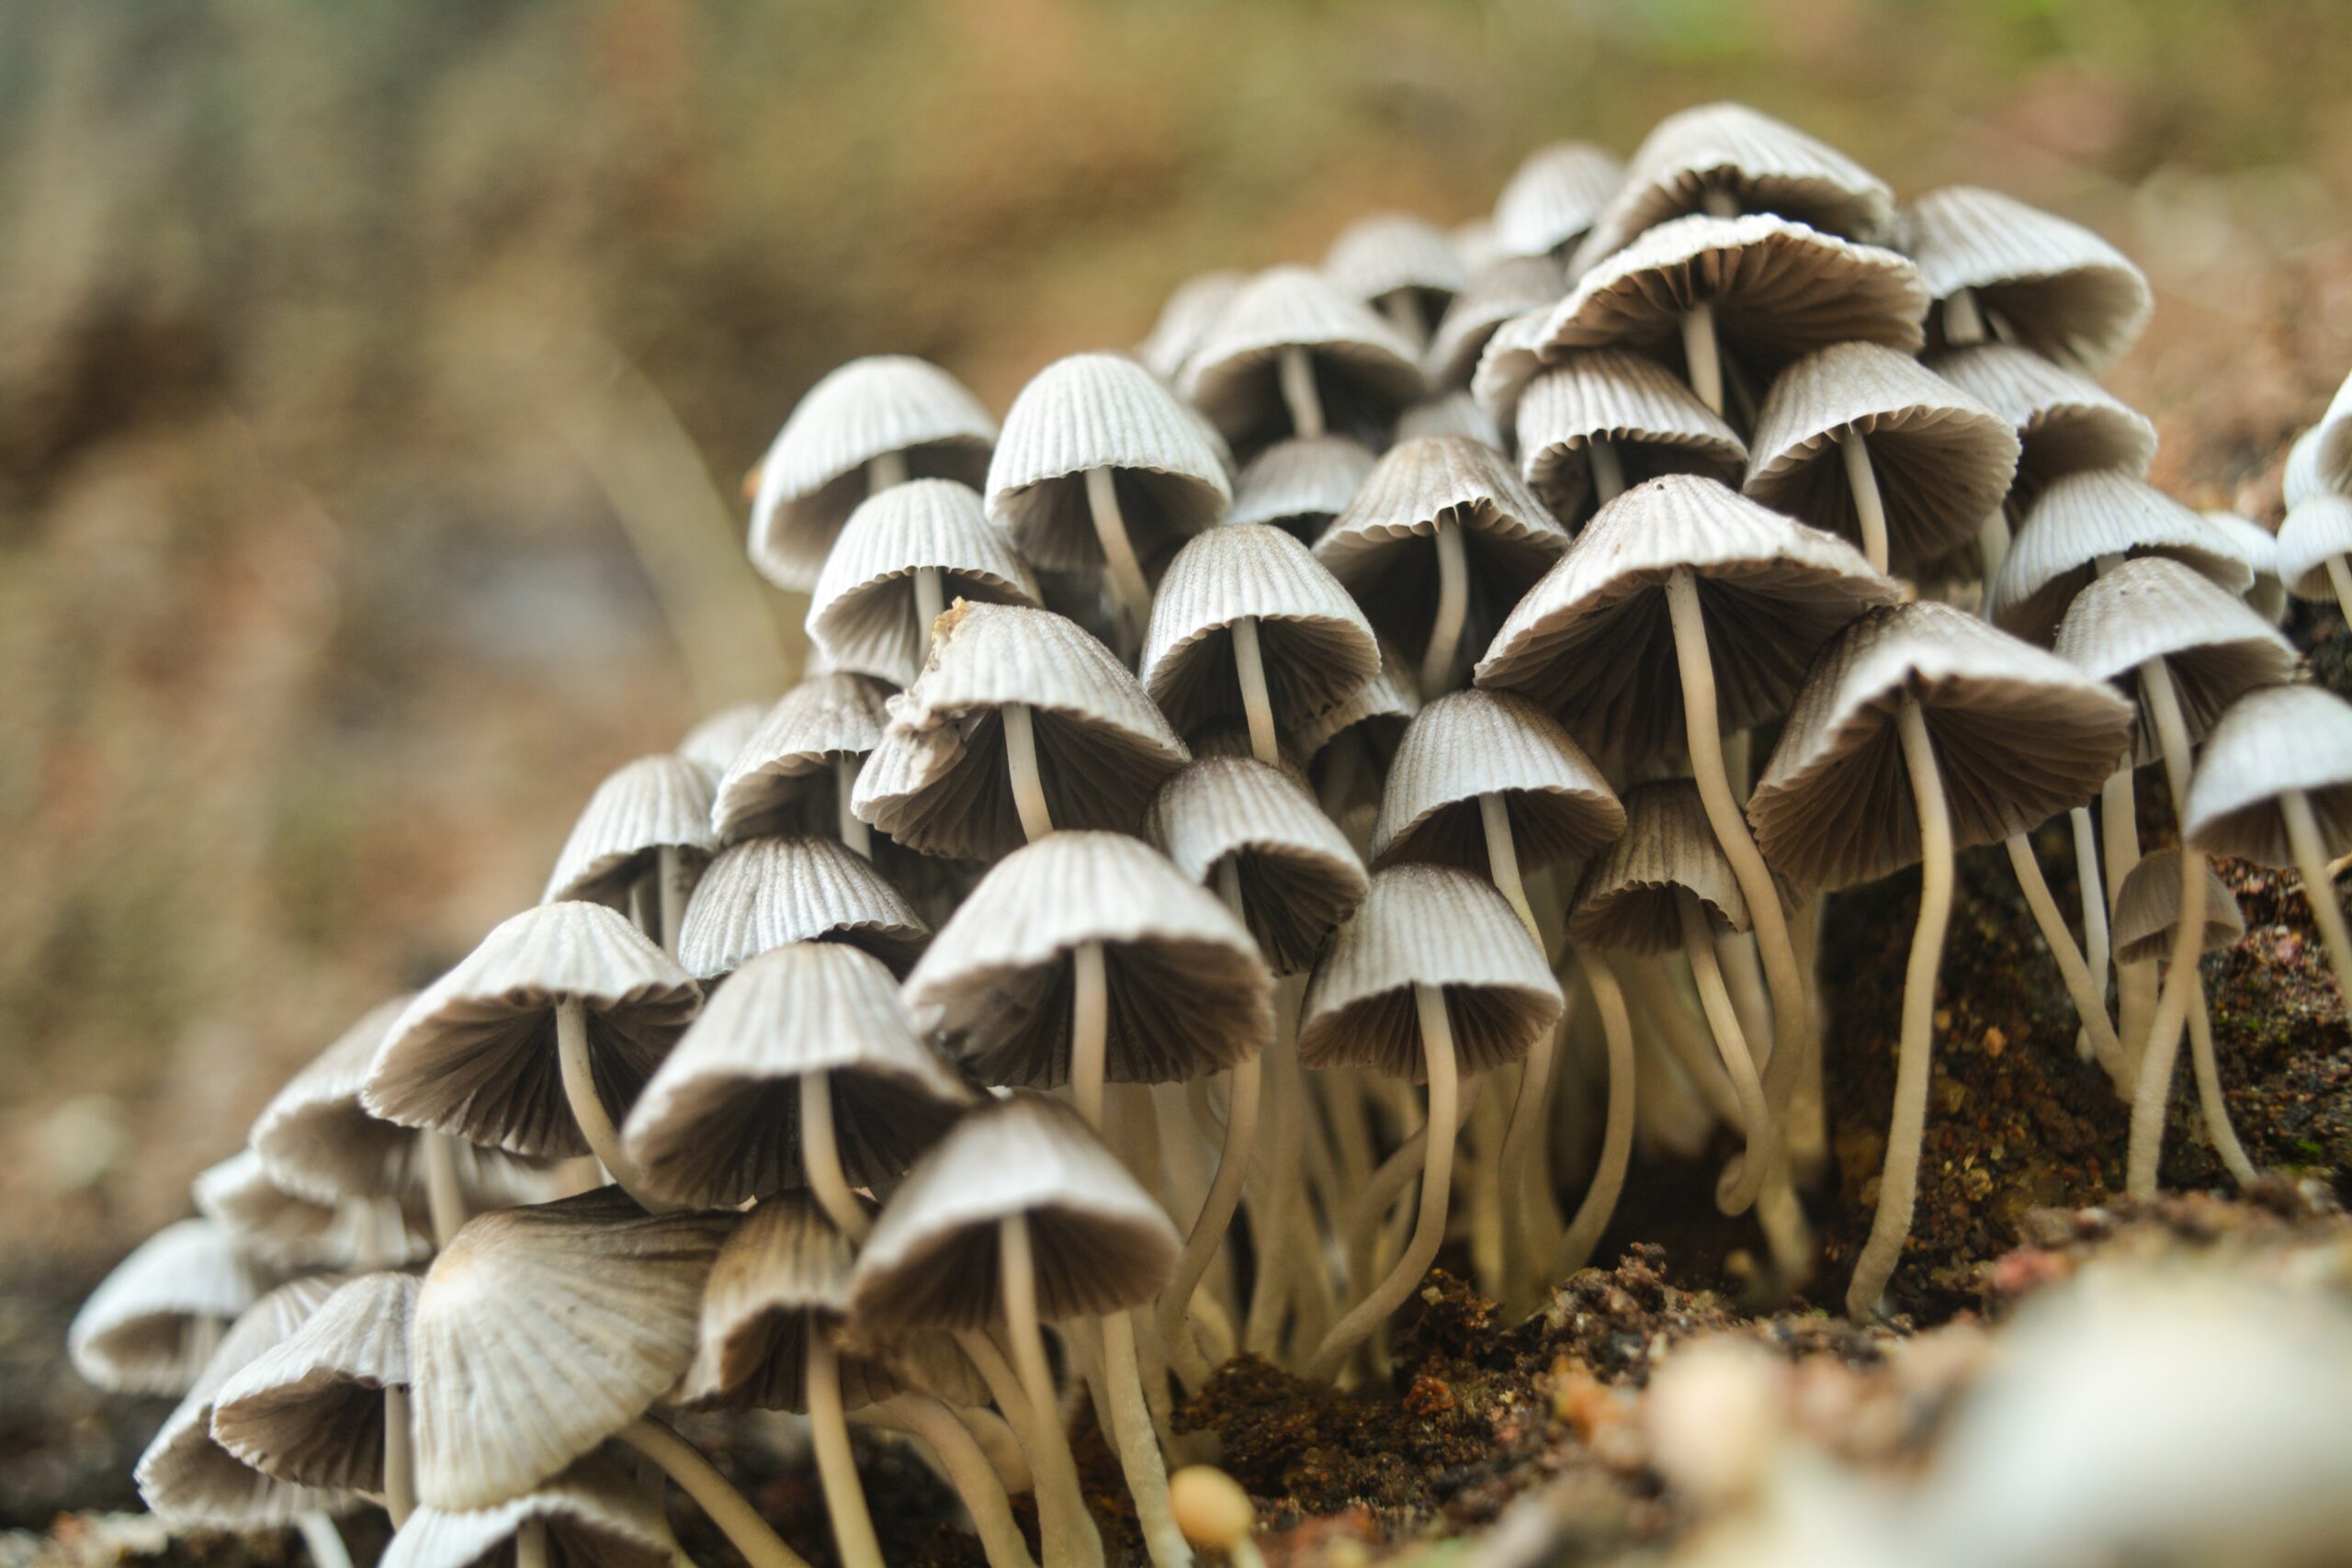 Canada Is Allowing People With Depression to Do Psychedelic Mushrooms